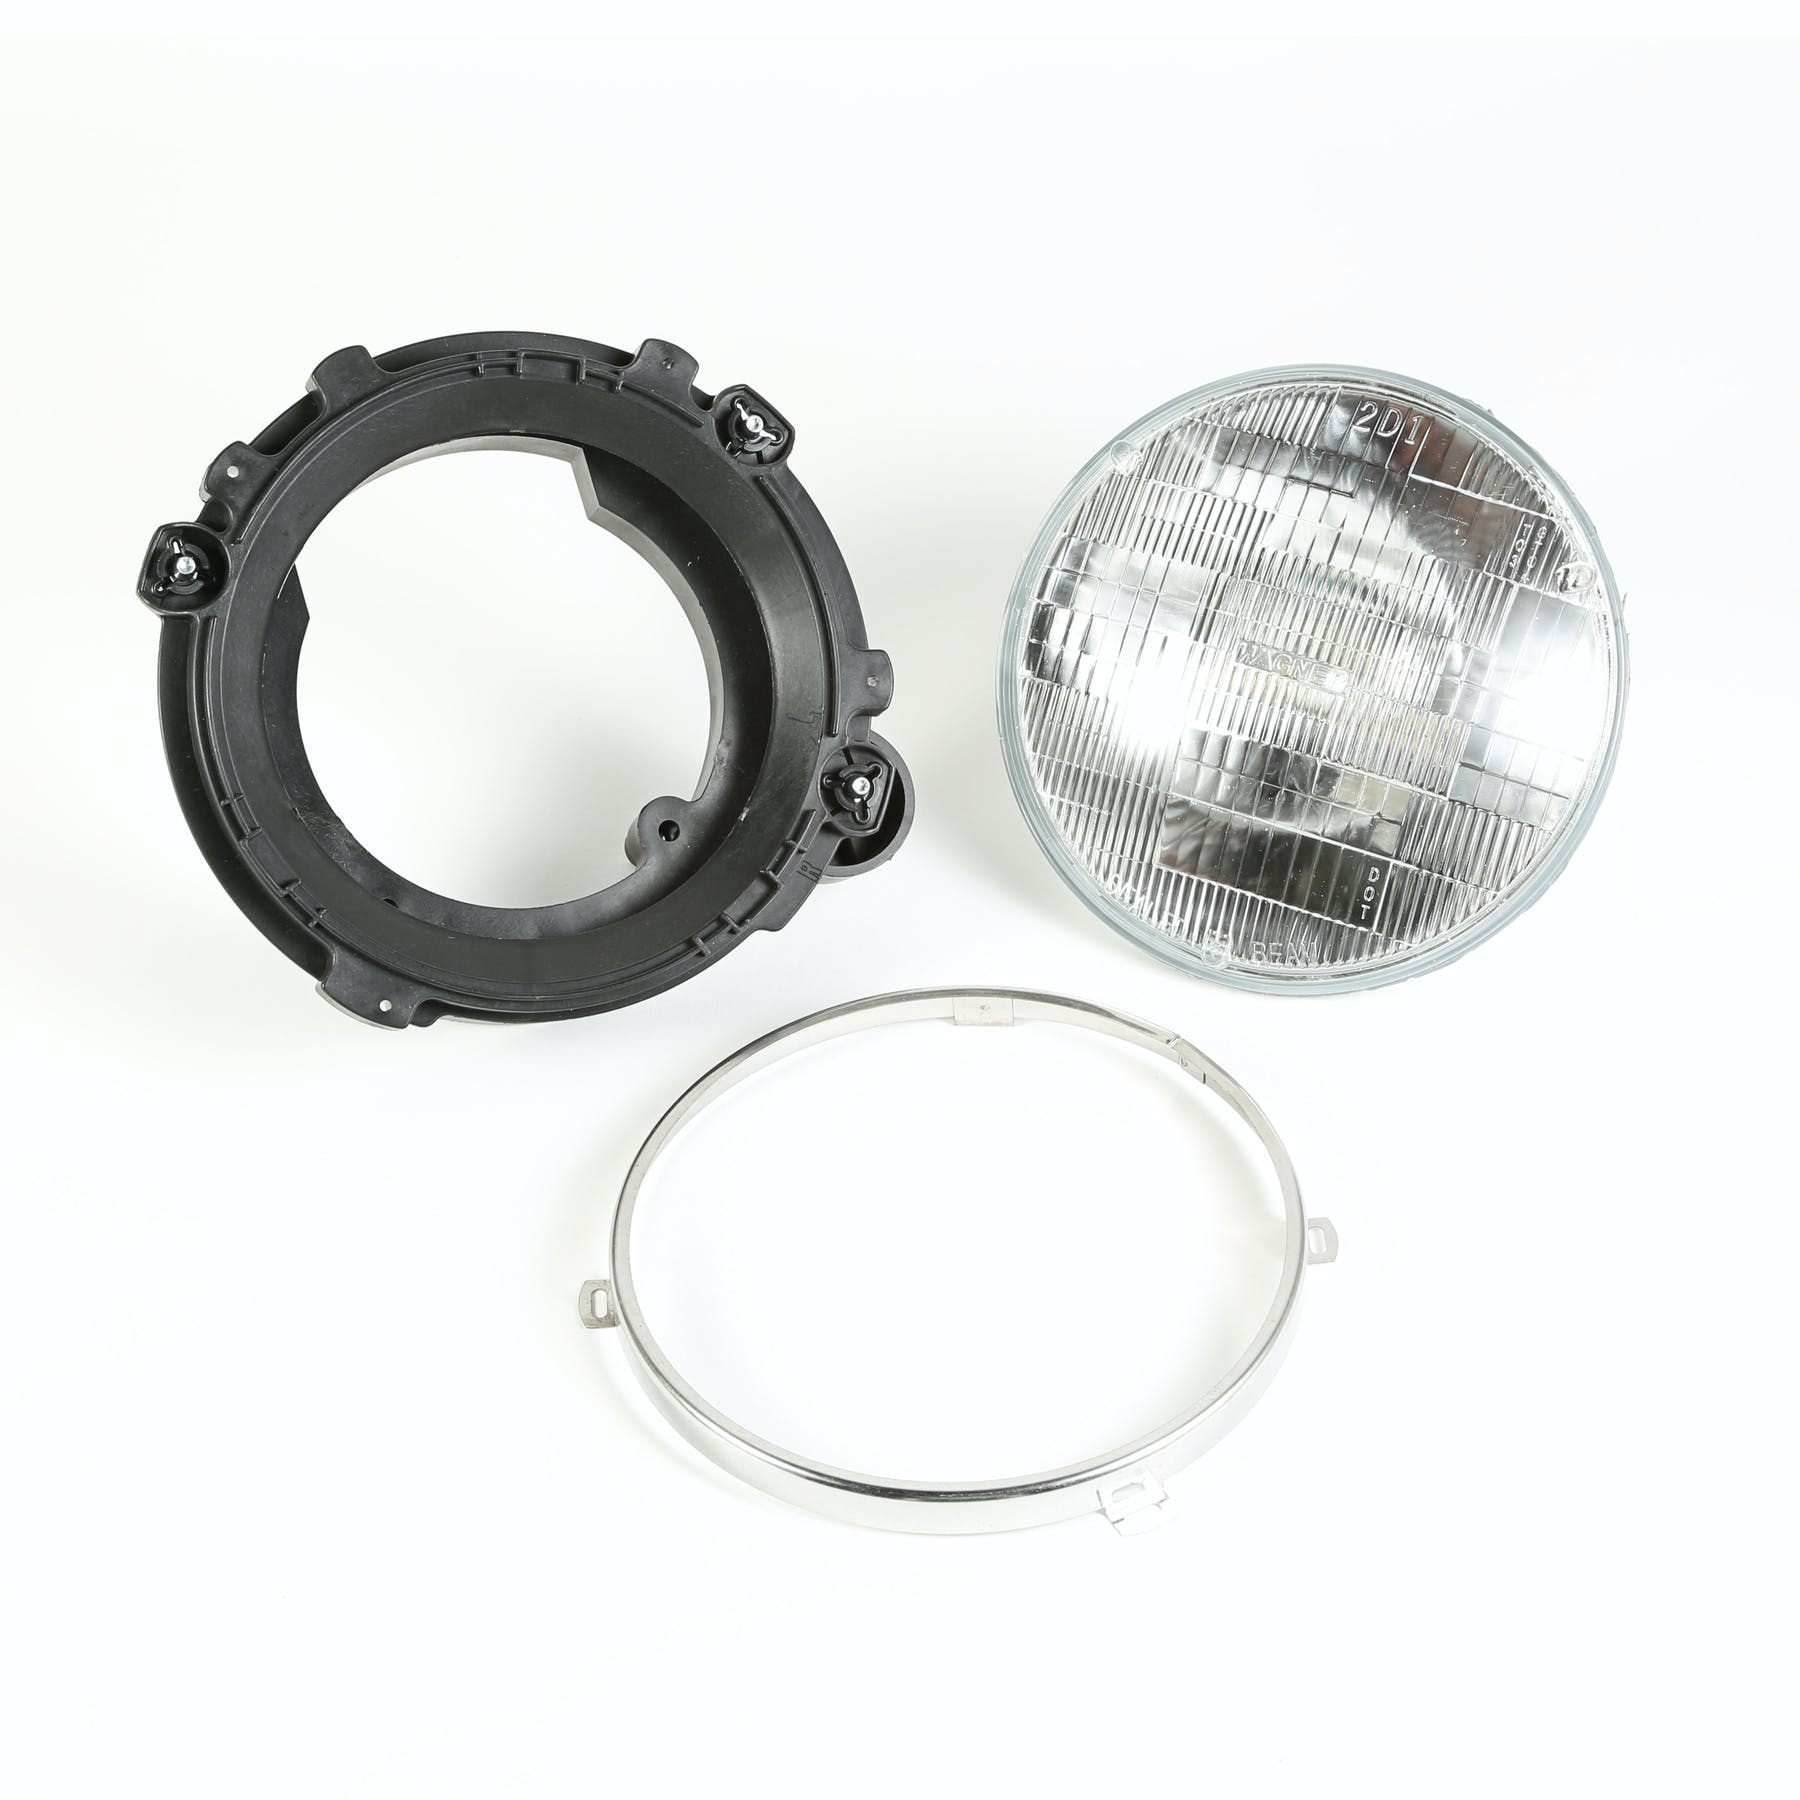 Omix-ADA 12402.04 Headlight Assembly with Bulb Right